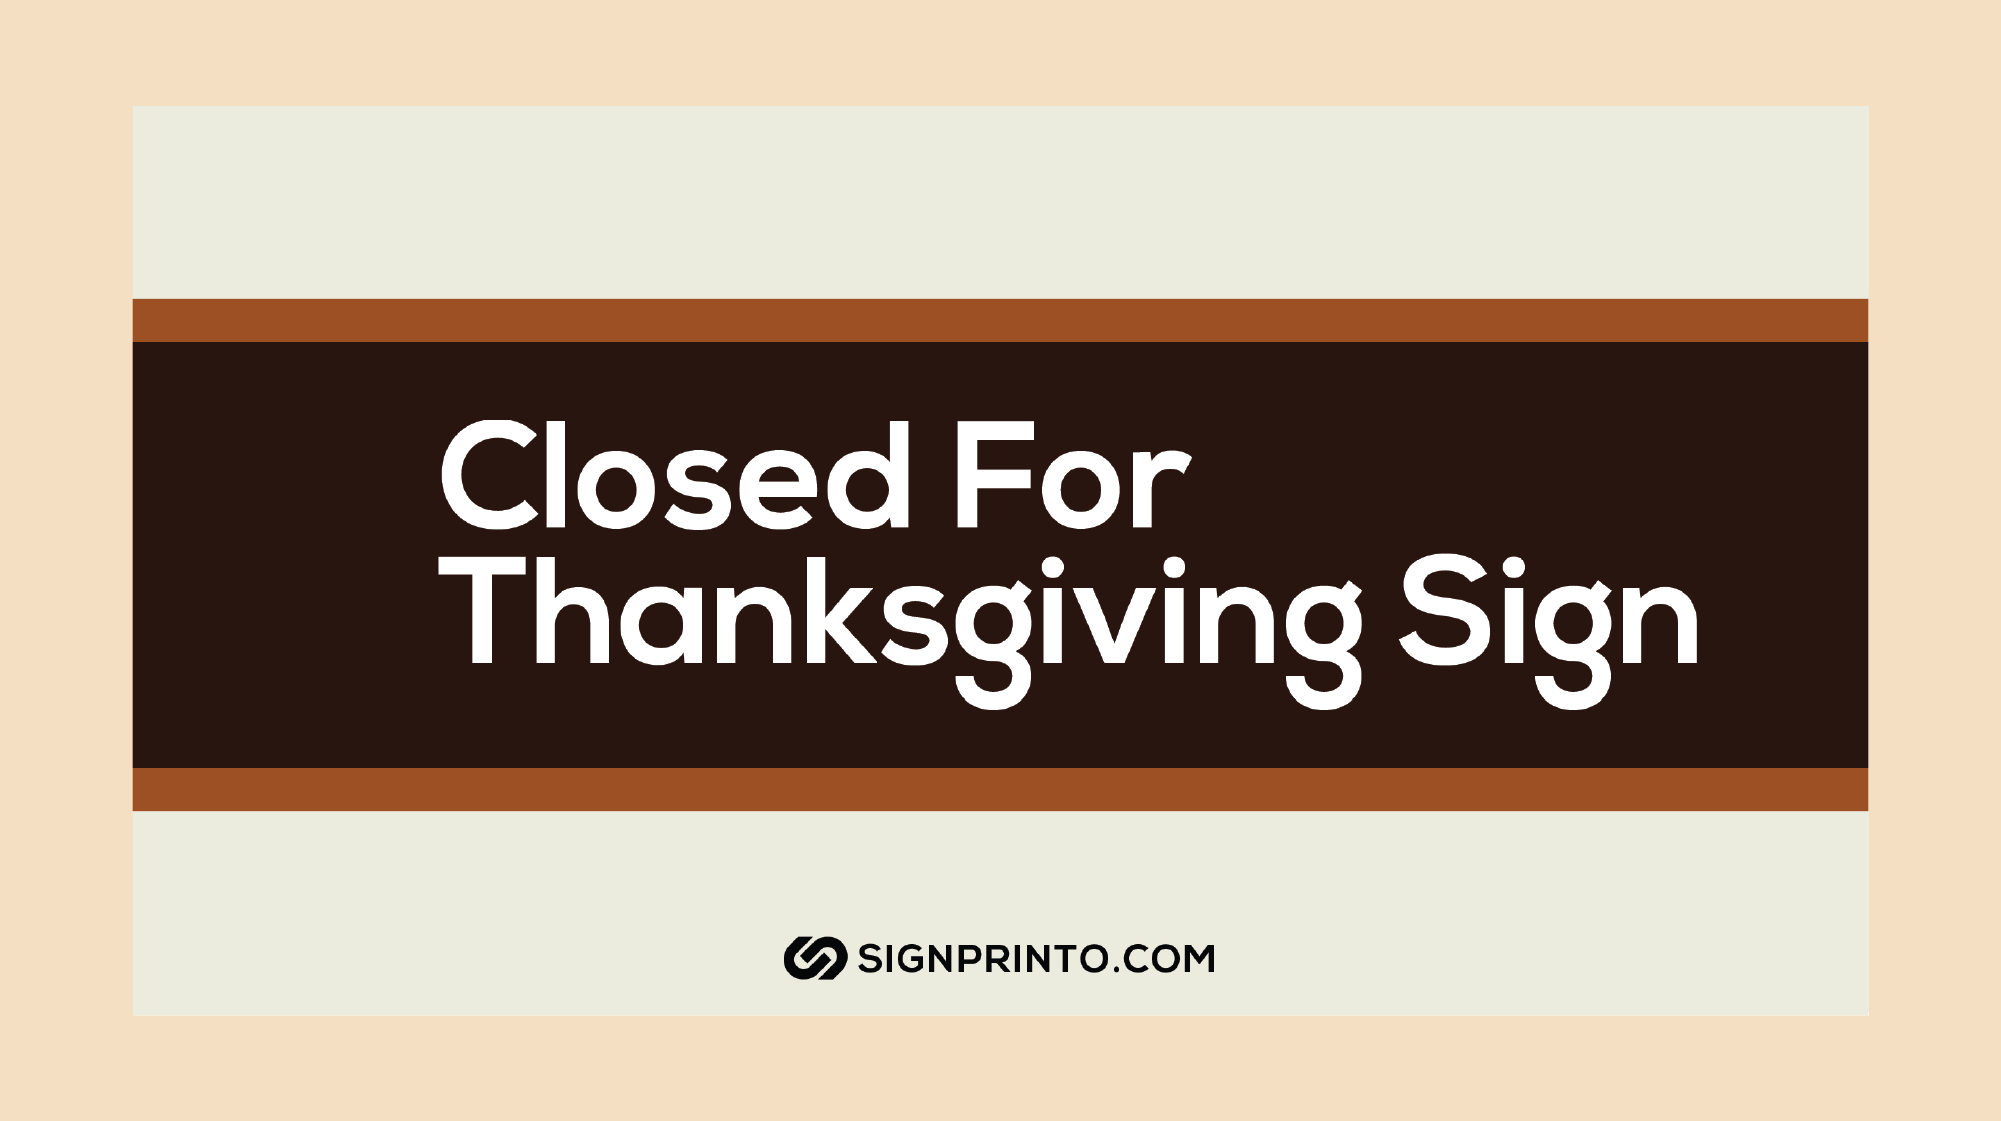 Closed for Thanksgiving sign